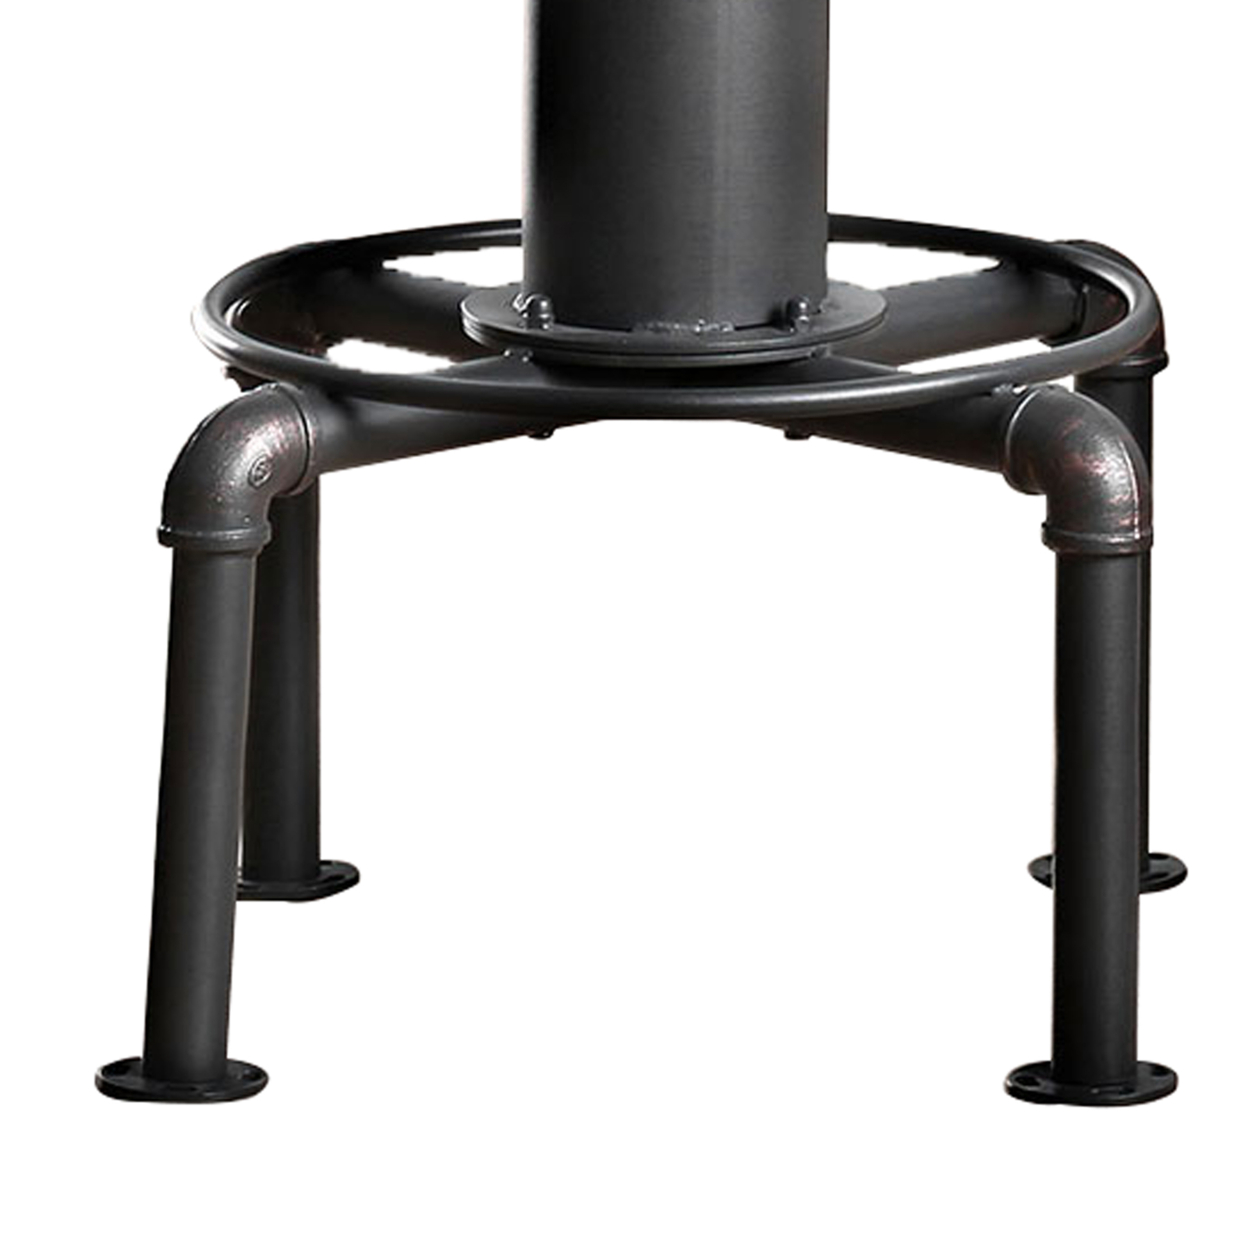 Bar Table With Fire Hydrant Style Metal Base, Black And Brown- Saltoro Sherpi